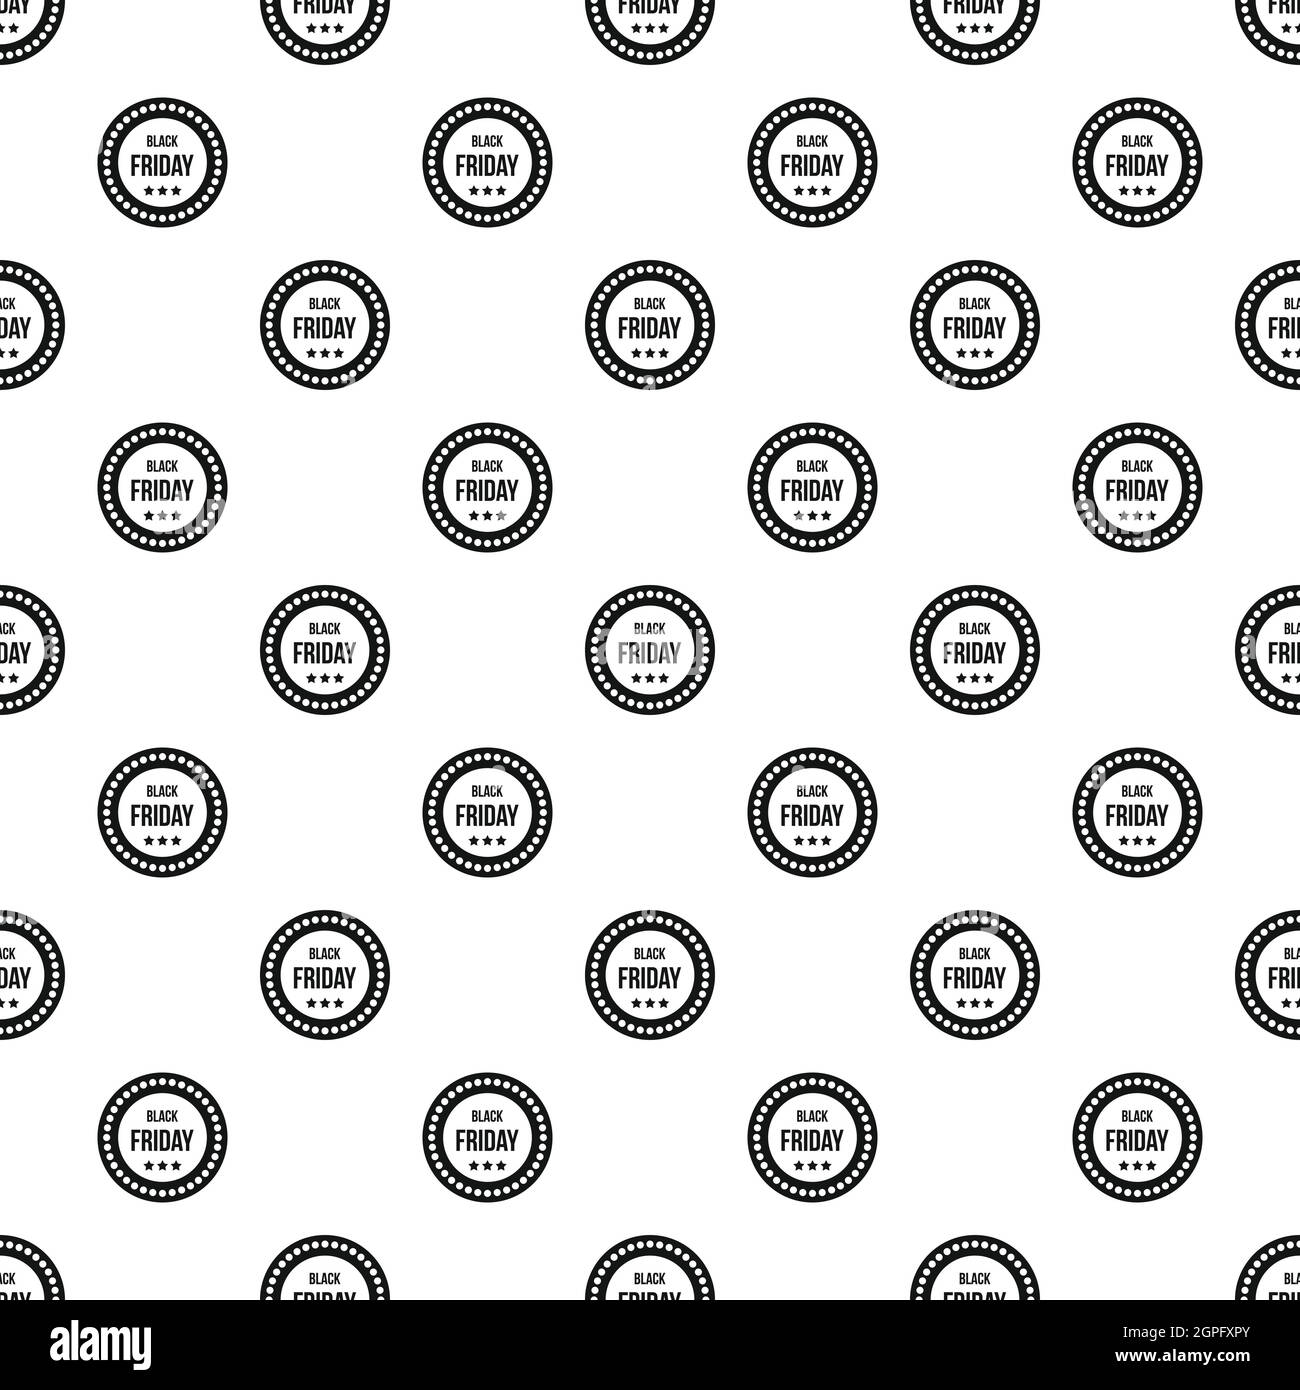 Black Friday sticker pattern, simple style Stock Vector